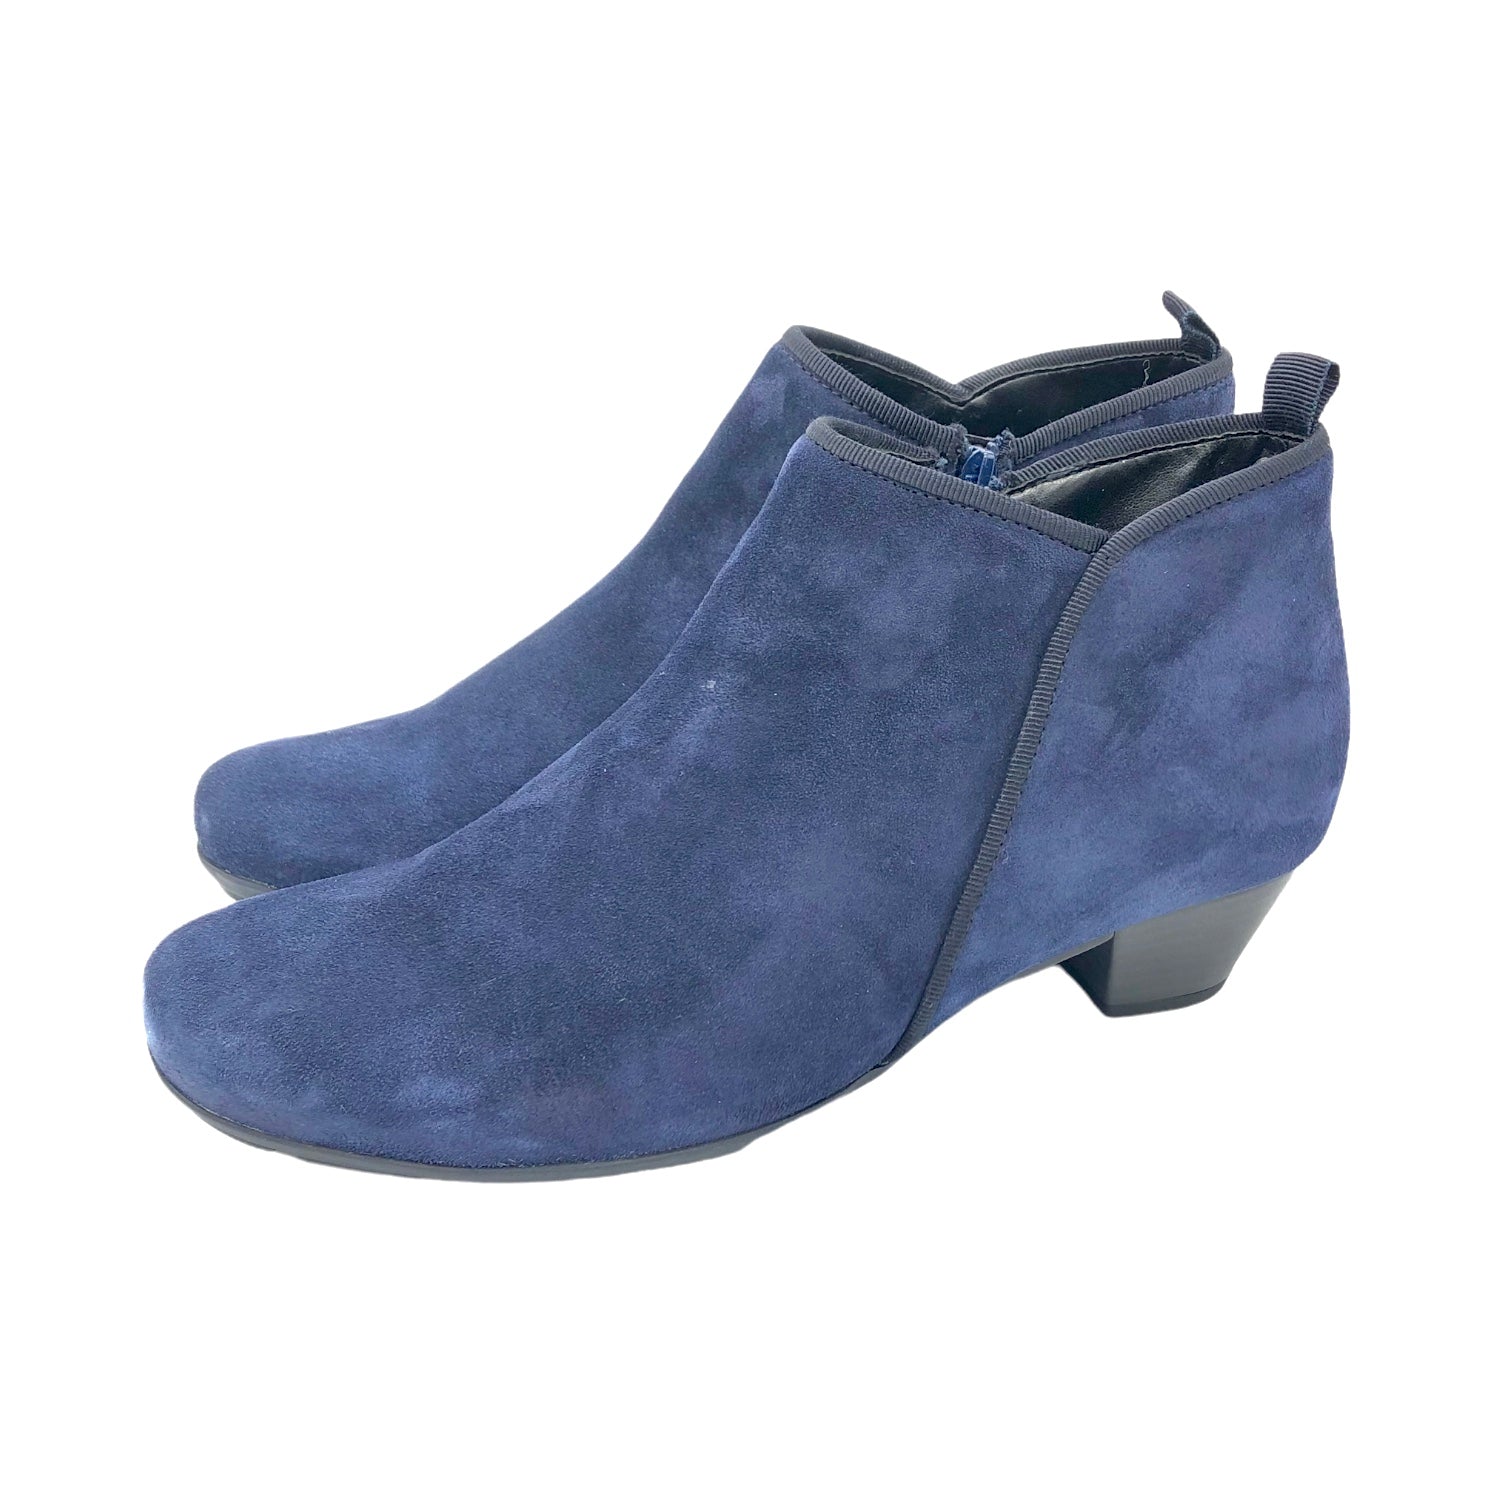 Gabor Trudy soft blue booties with dressy low heel –